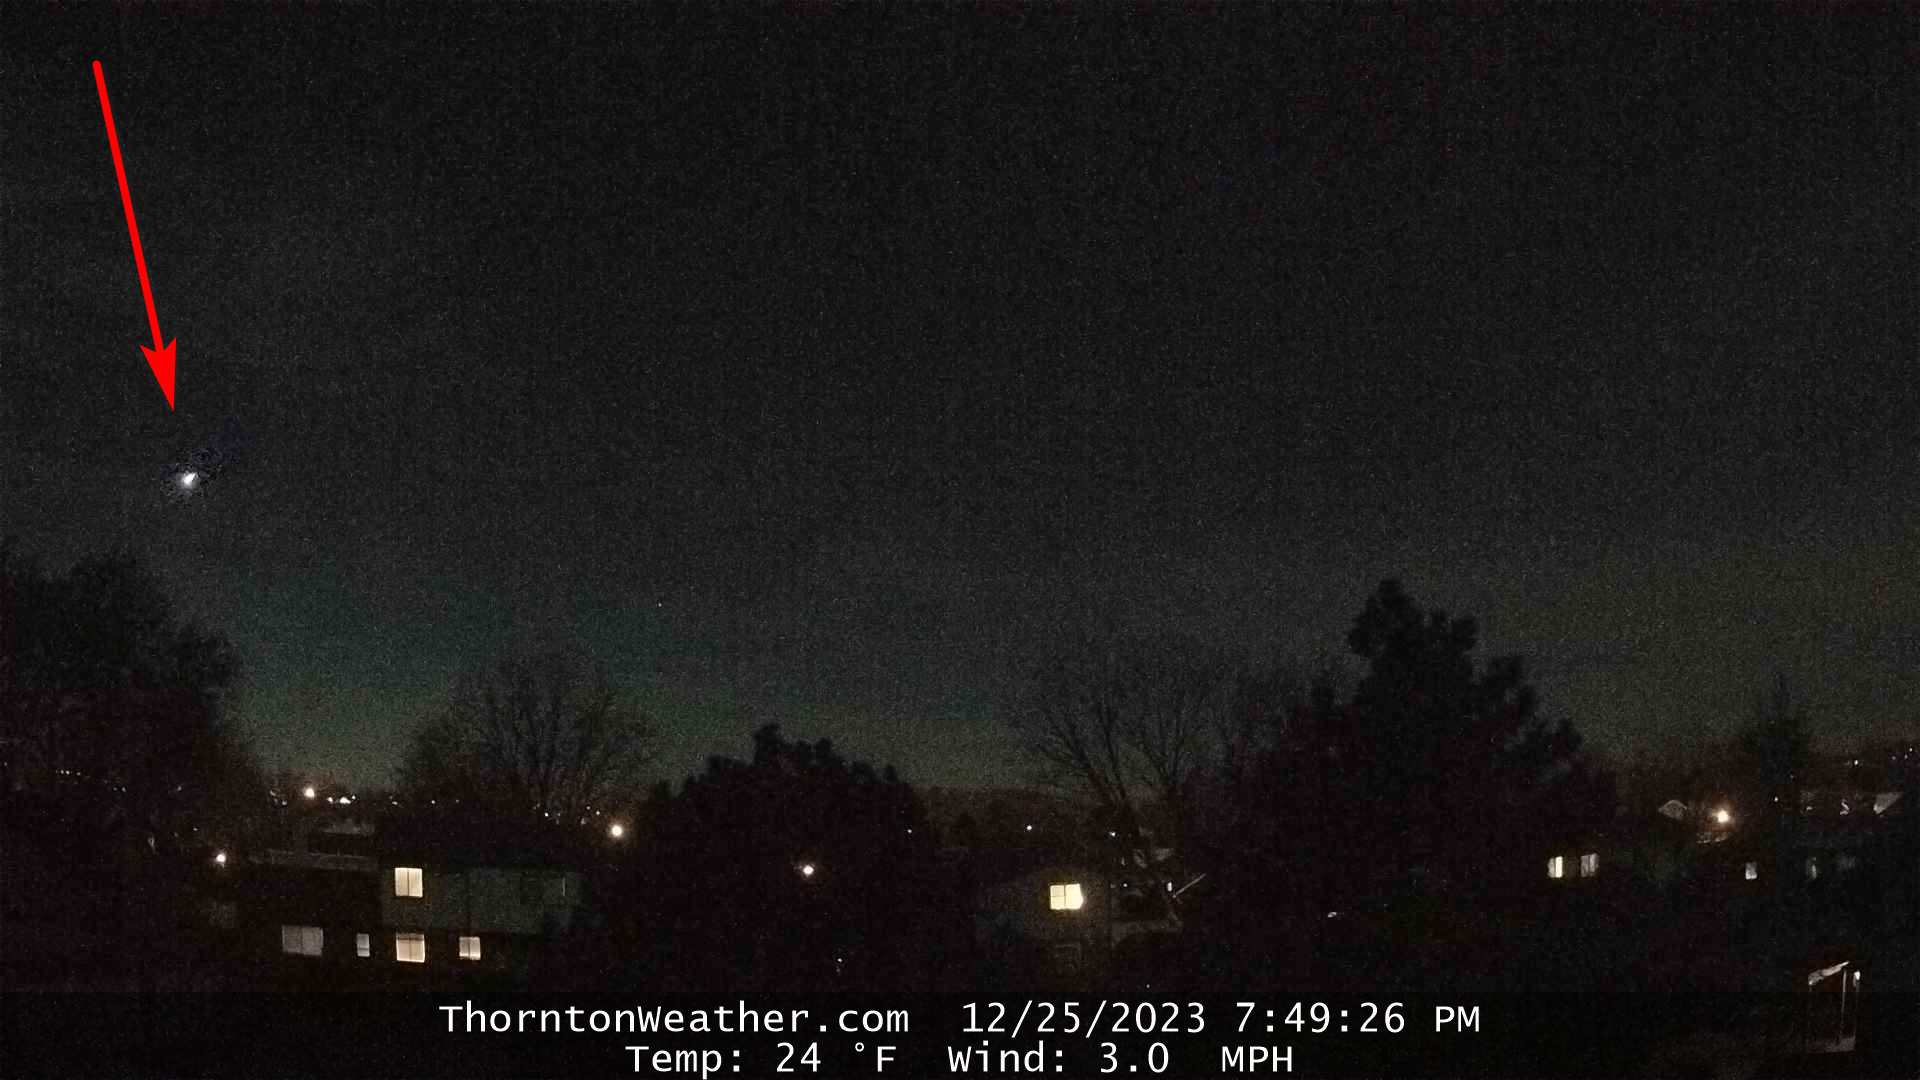 A still shot from a webcam captures a meteor as it enters the atmosphere. (ThorntonWeather.com)